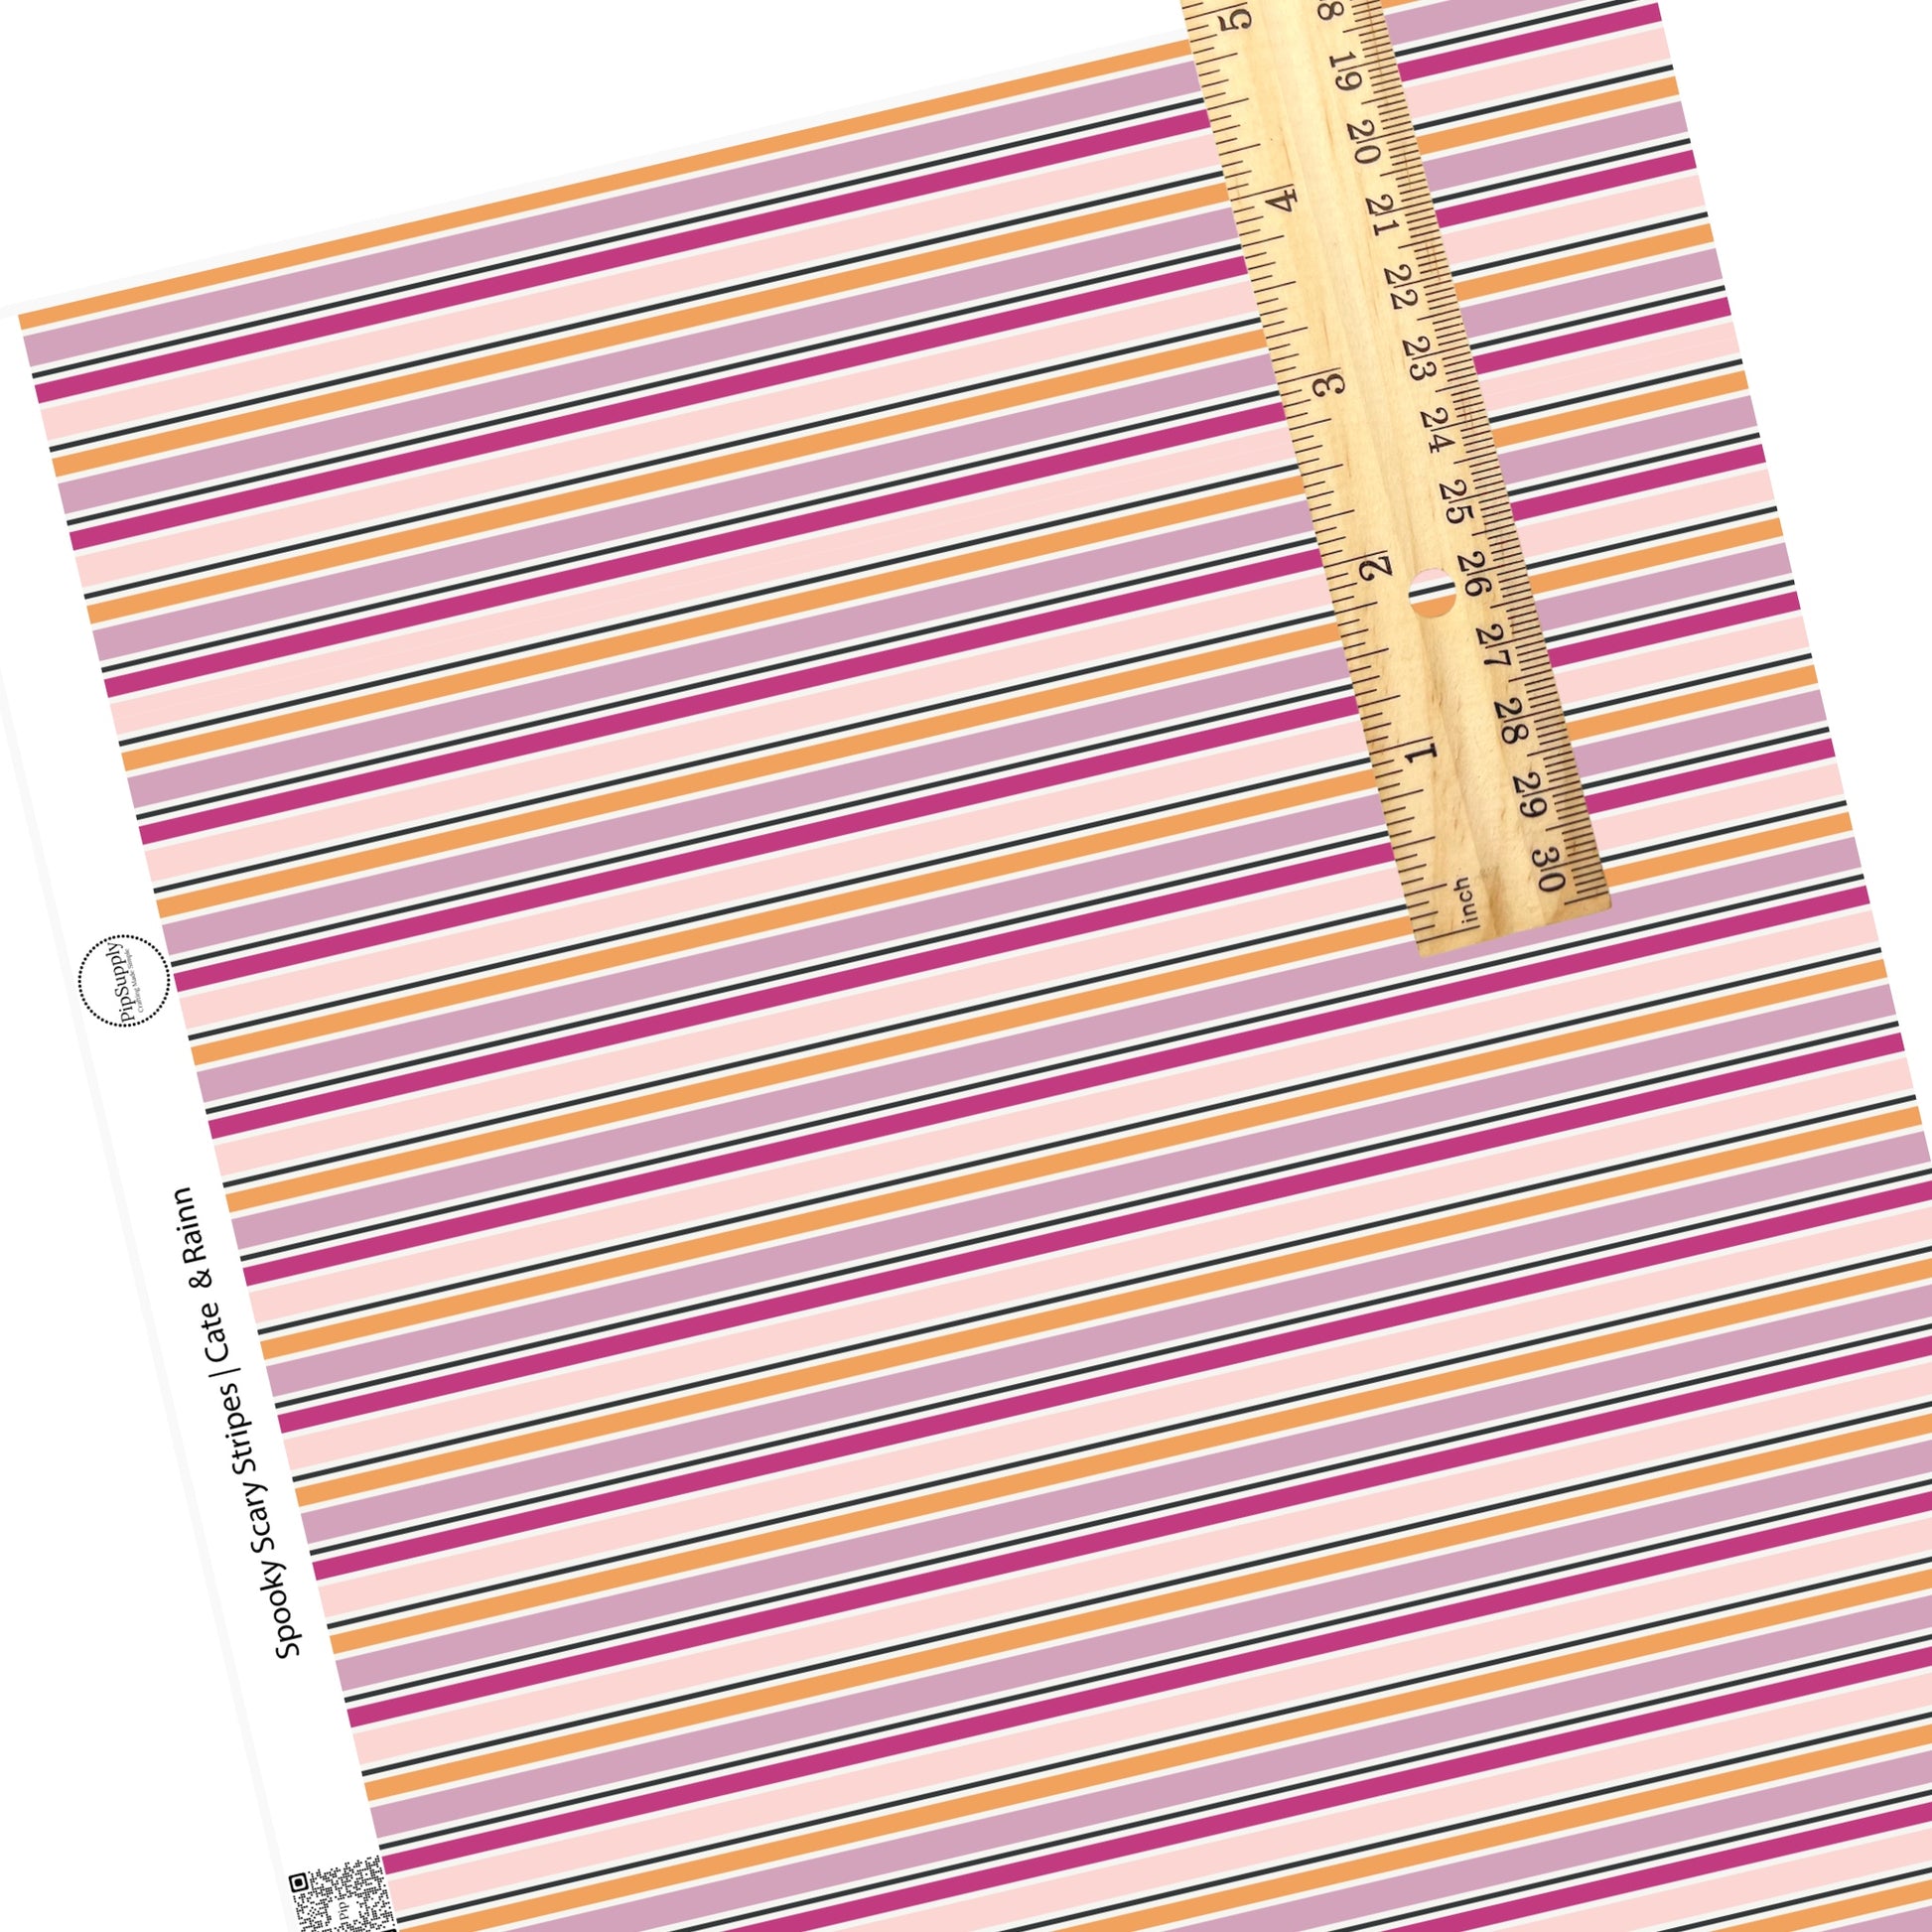 These Halloween stripe theme faux leather sheets contain the following design elements: white, light pink, dark pink, black, and orange stripes. Our CPSIA compliant faux leather sheets or rolls can be used for all types of crafting projects.